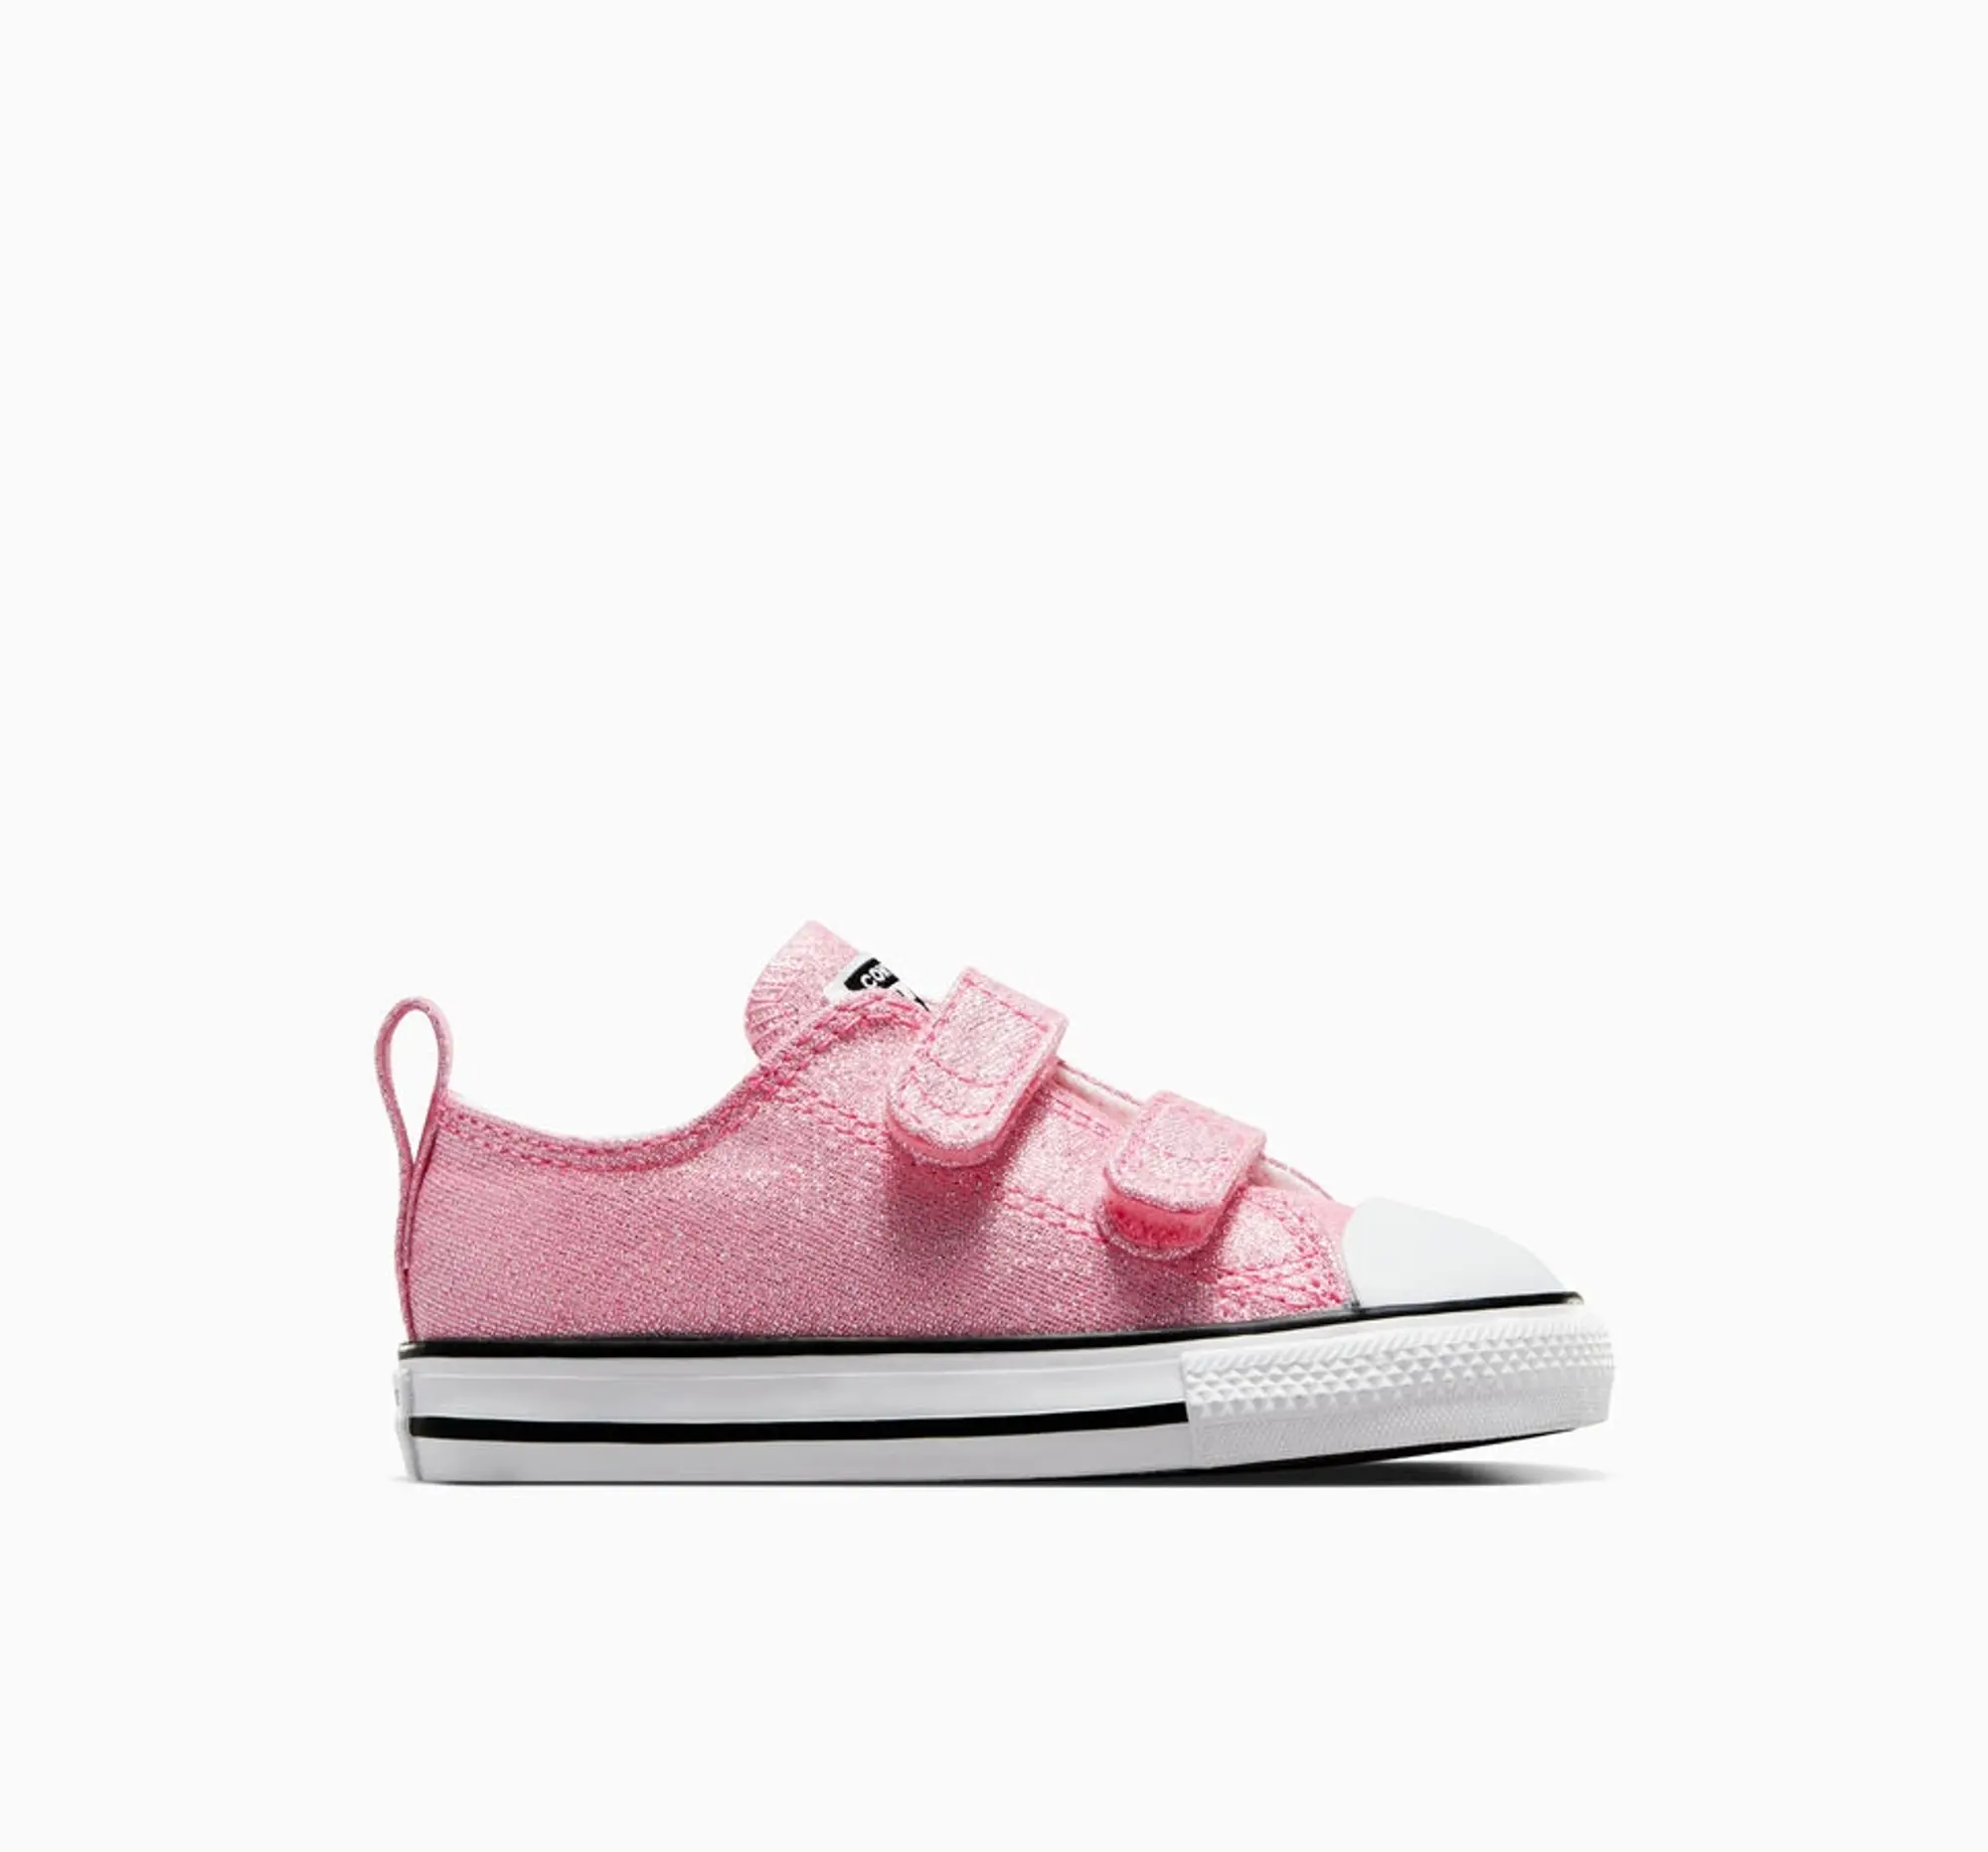 Converse Pink All Star 2v Lo Prism Glitter Girls Toddler Trainers